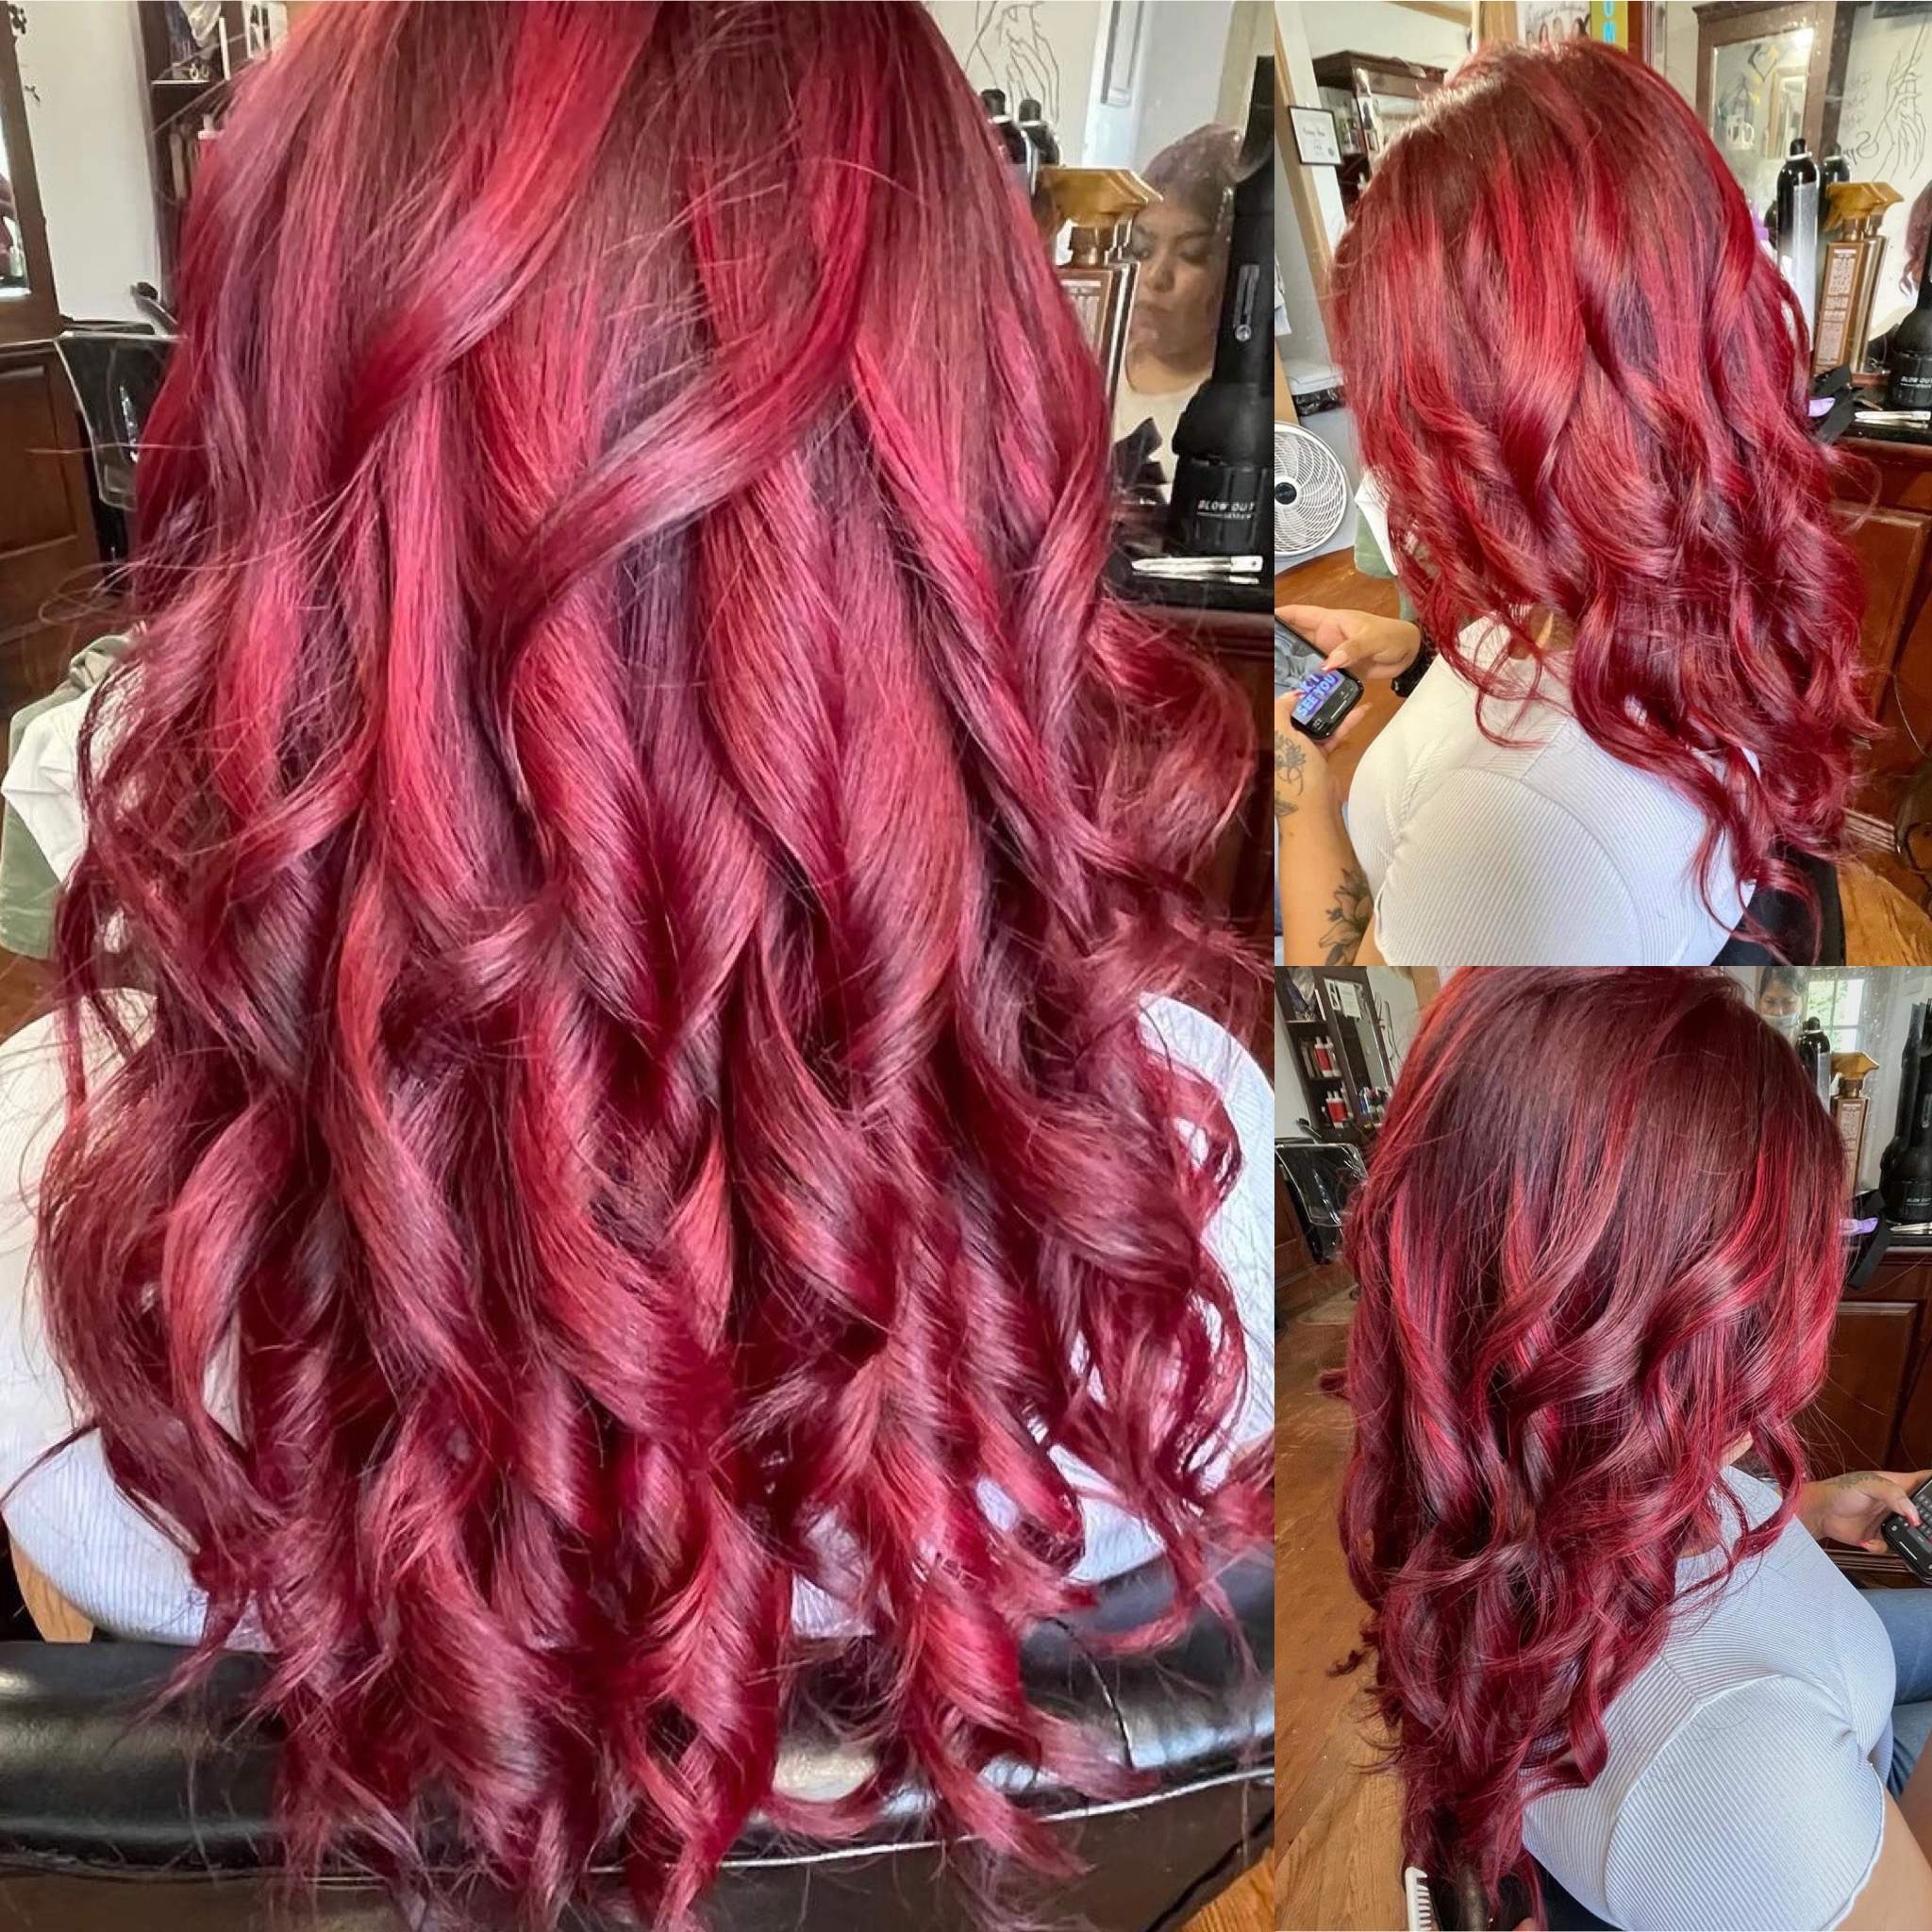 red-hair-color Top 75+ Hair Color Ideas for Women in 2022